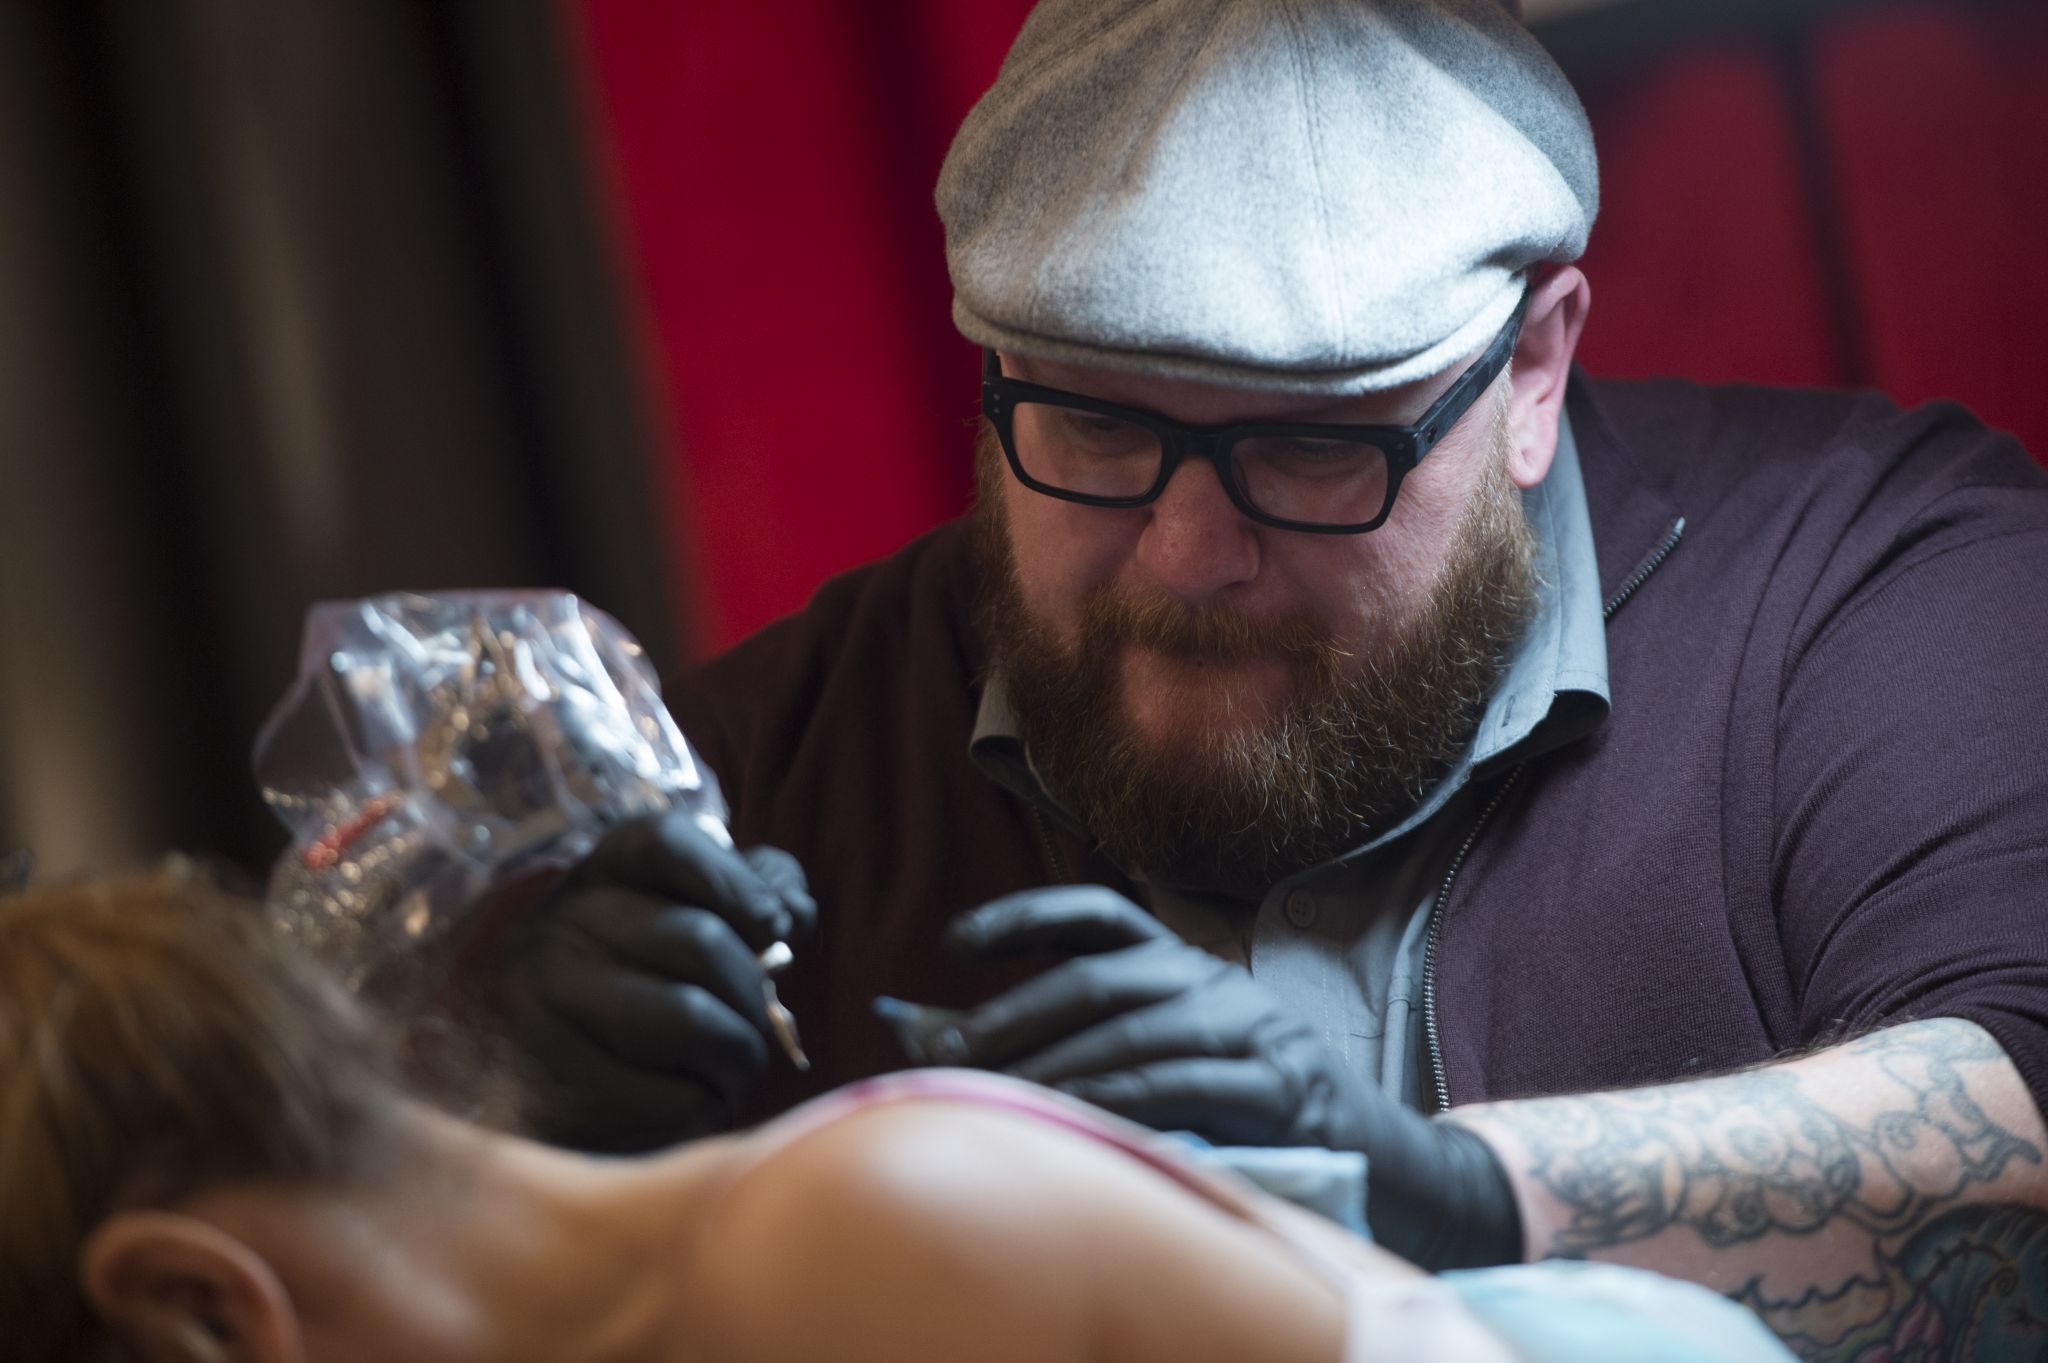 Mentor tattoo artist lined up for Ink Master reality show – News-Herald